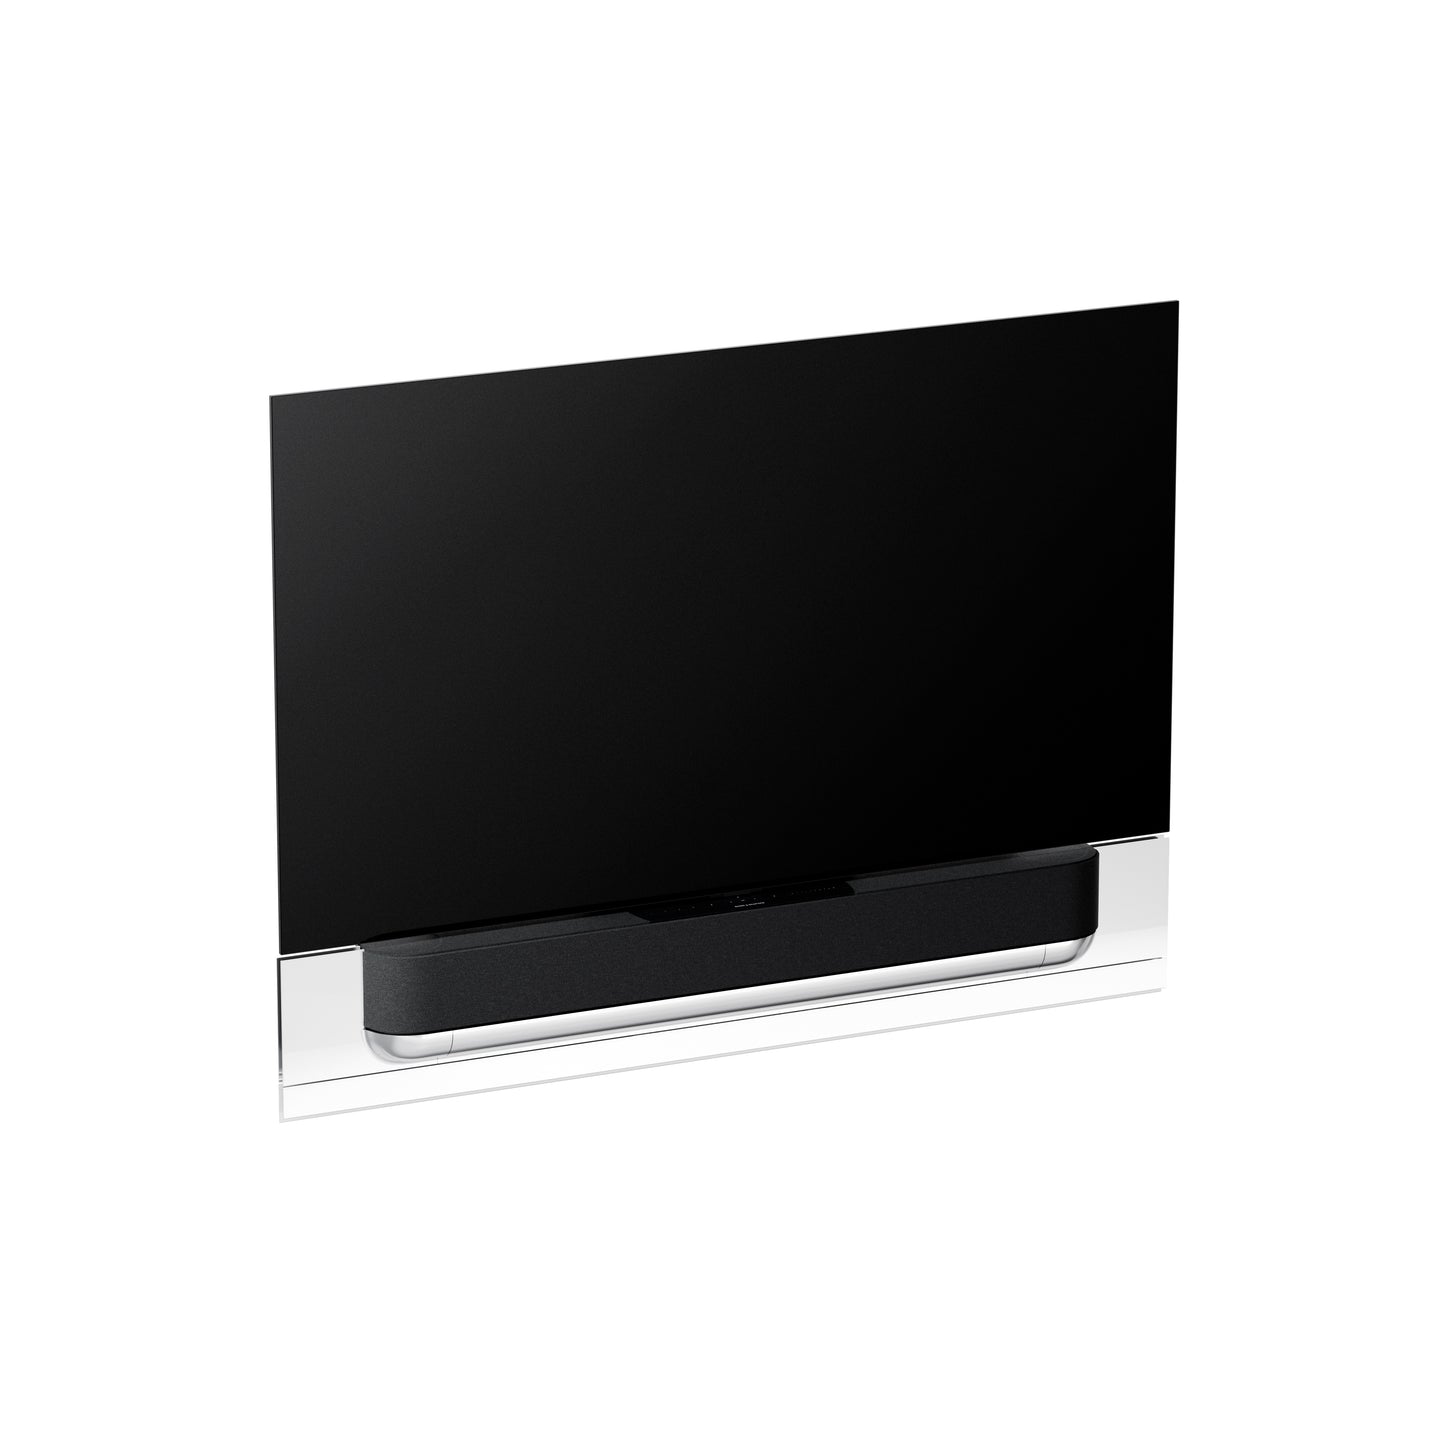 BeoSound Theatre as TV 65 inches  with grey cover on wall bracket